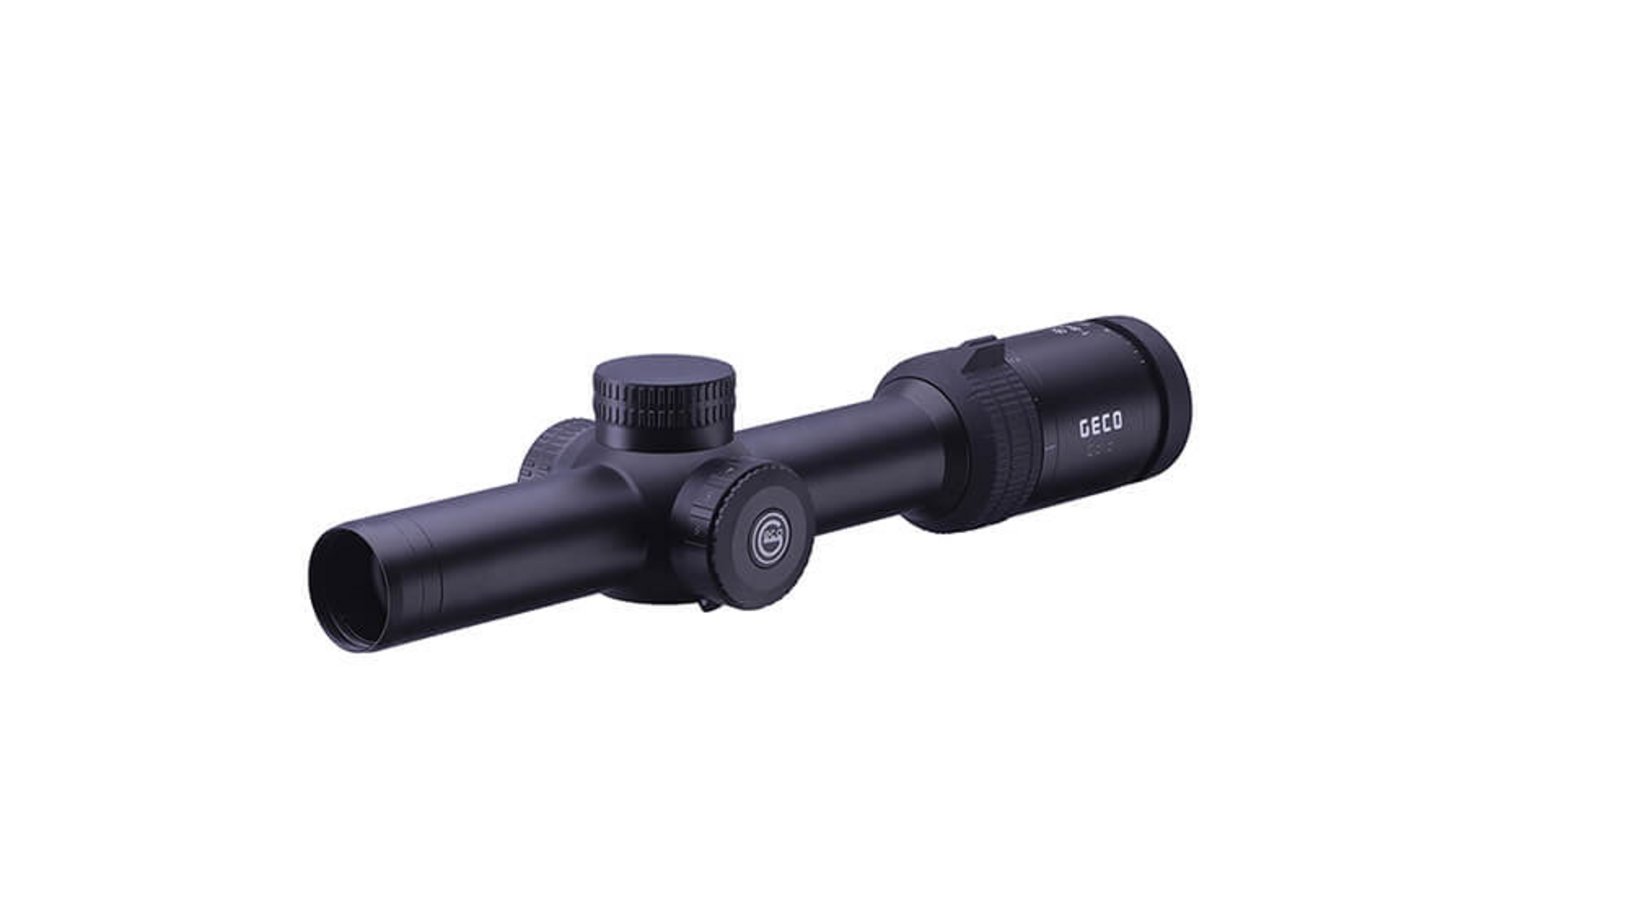 Isometric view image of the GECO Riflescope Gold 1-8x24i